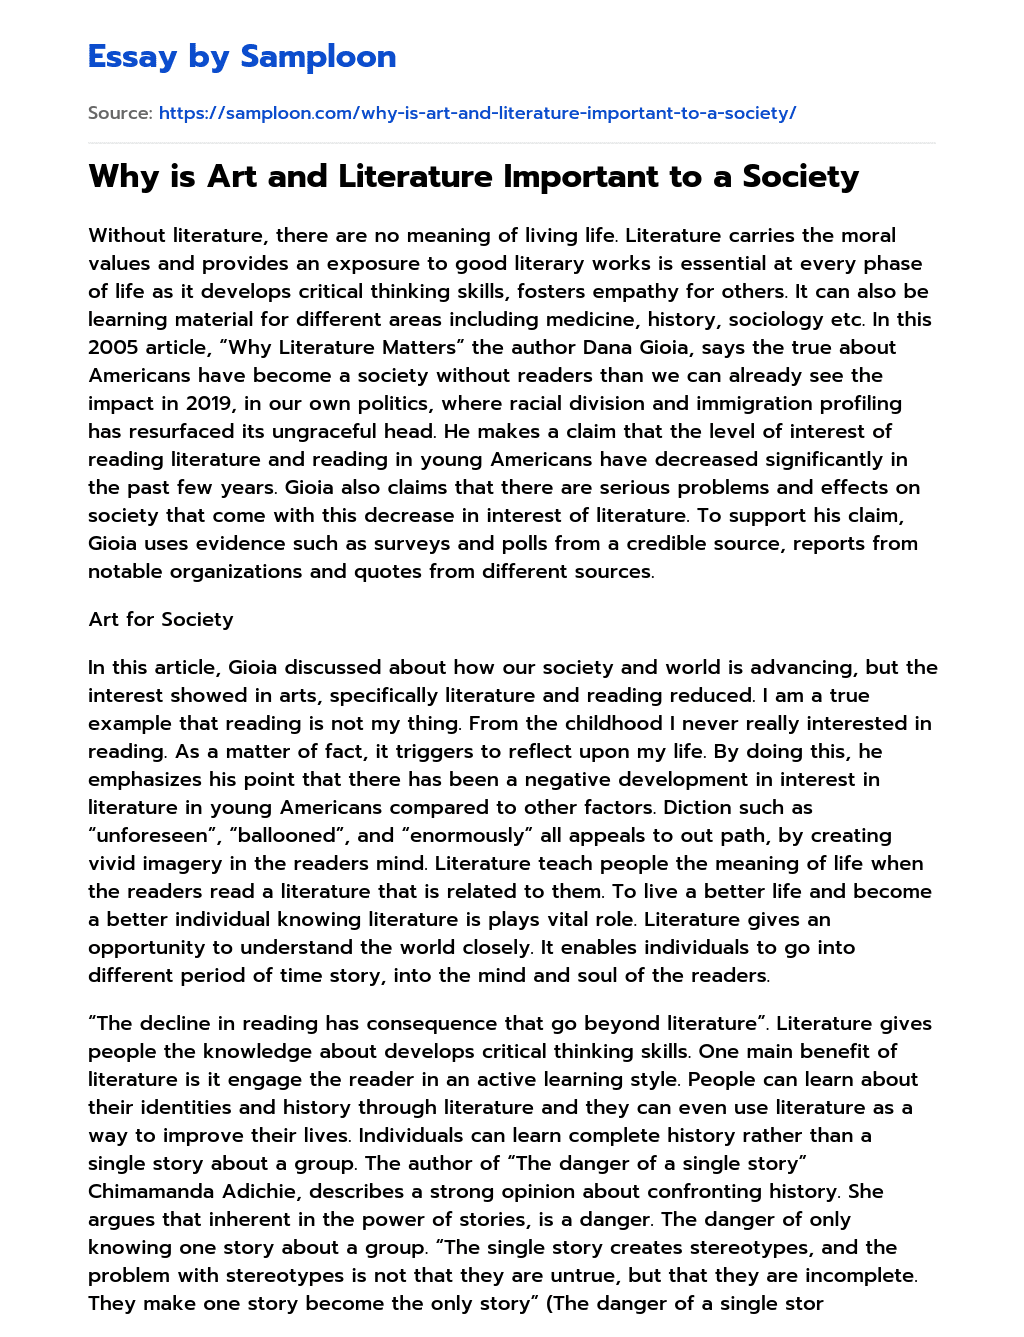 Why is Art and Literature Important to a Society essay